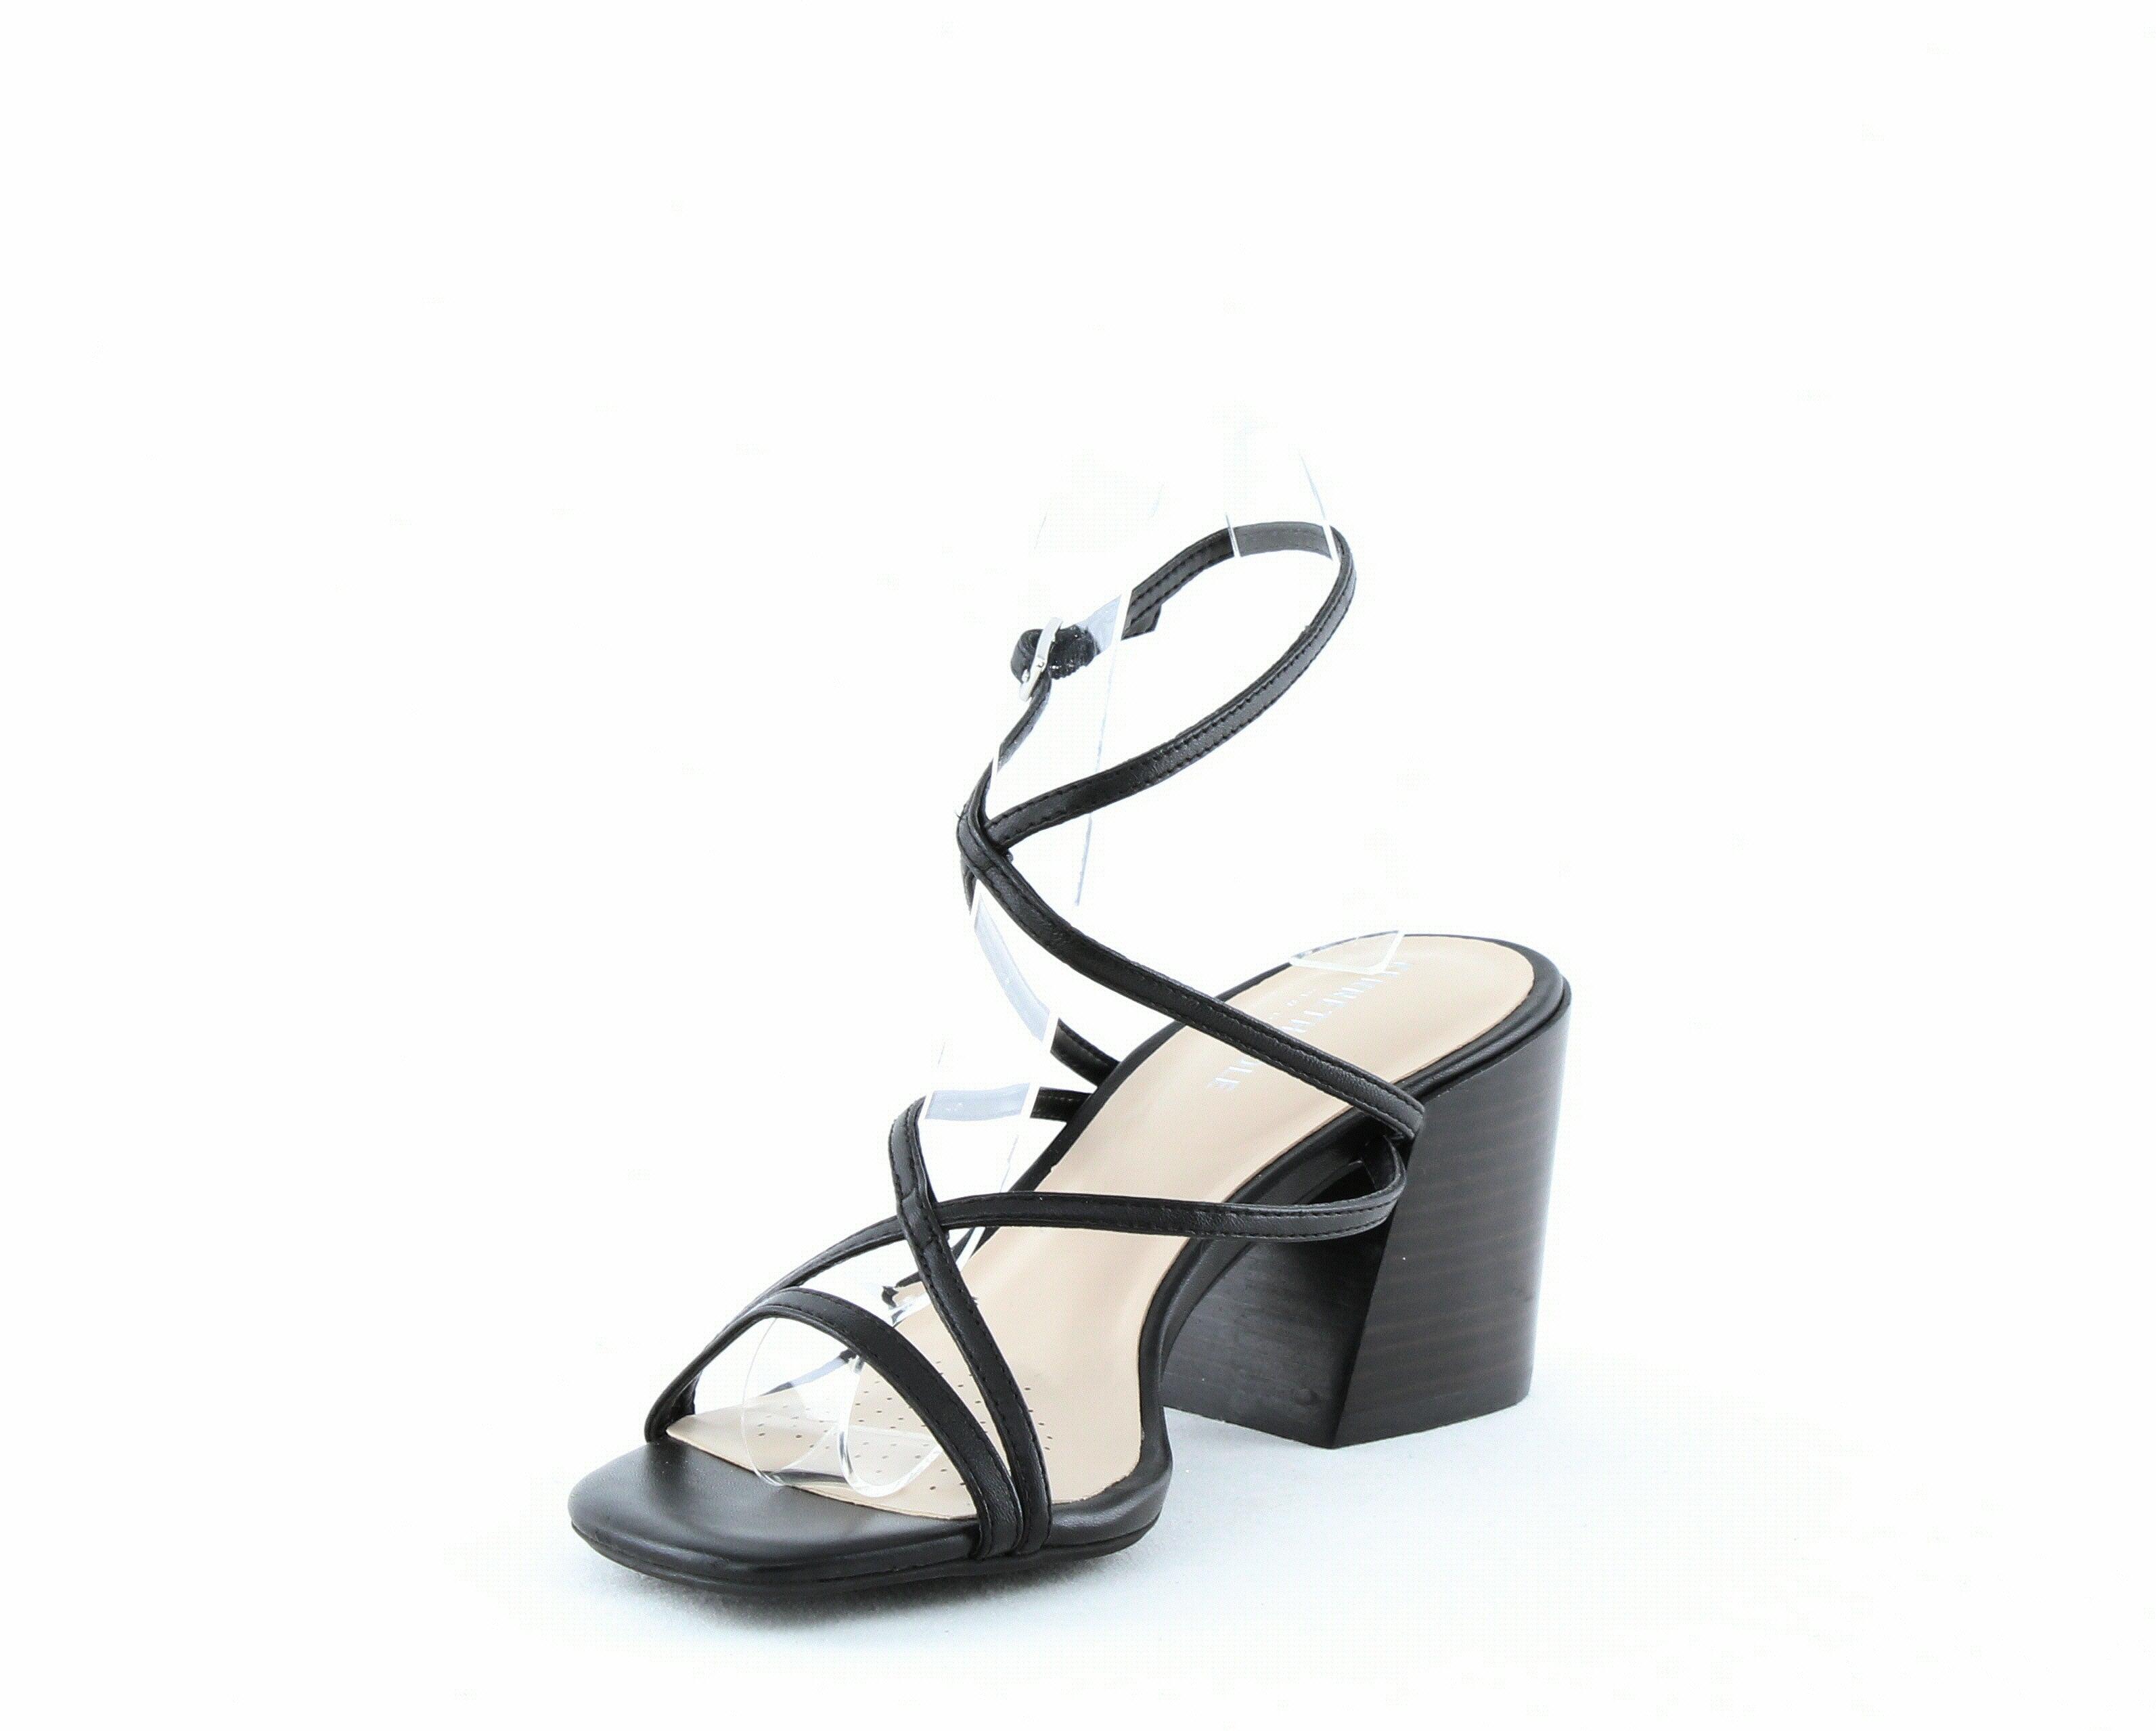 Details about   Kenneth ColeMaisie Ankle-Strap SandalsBlack